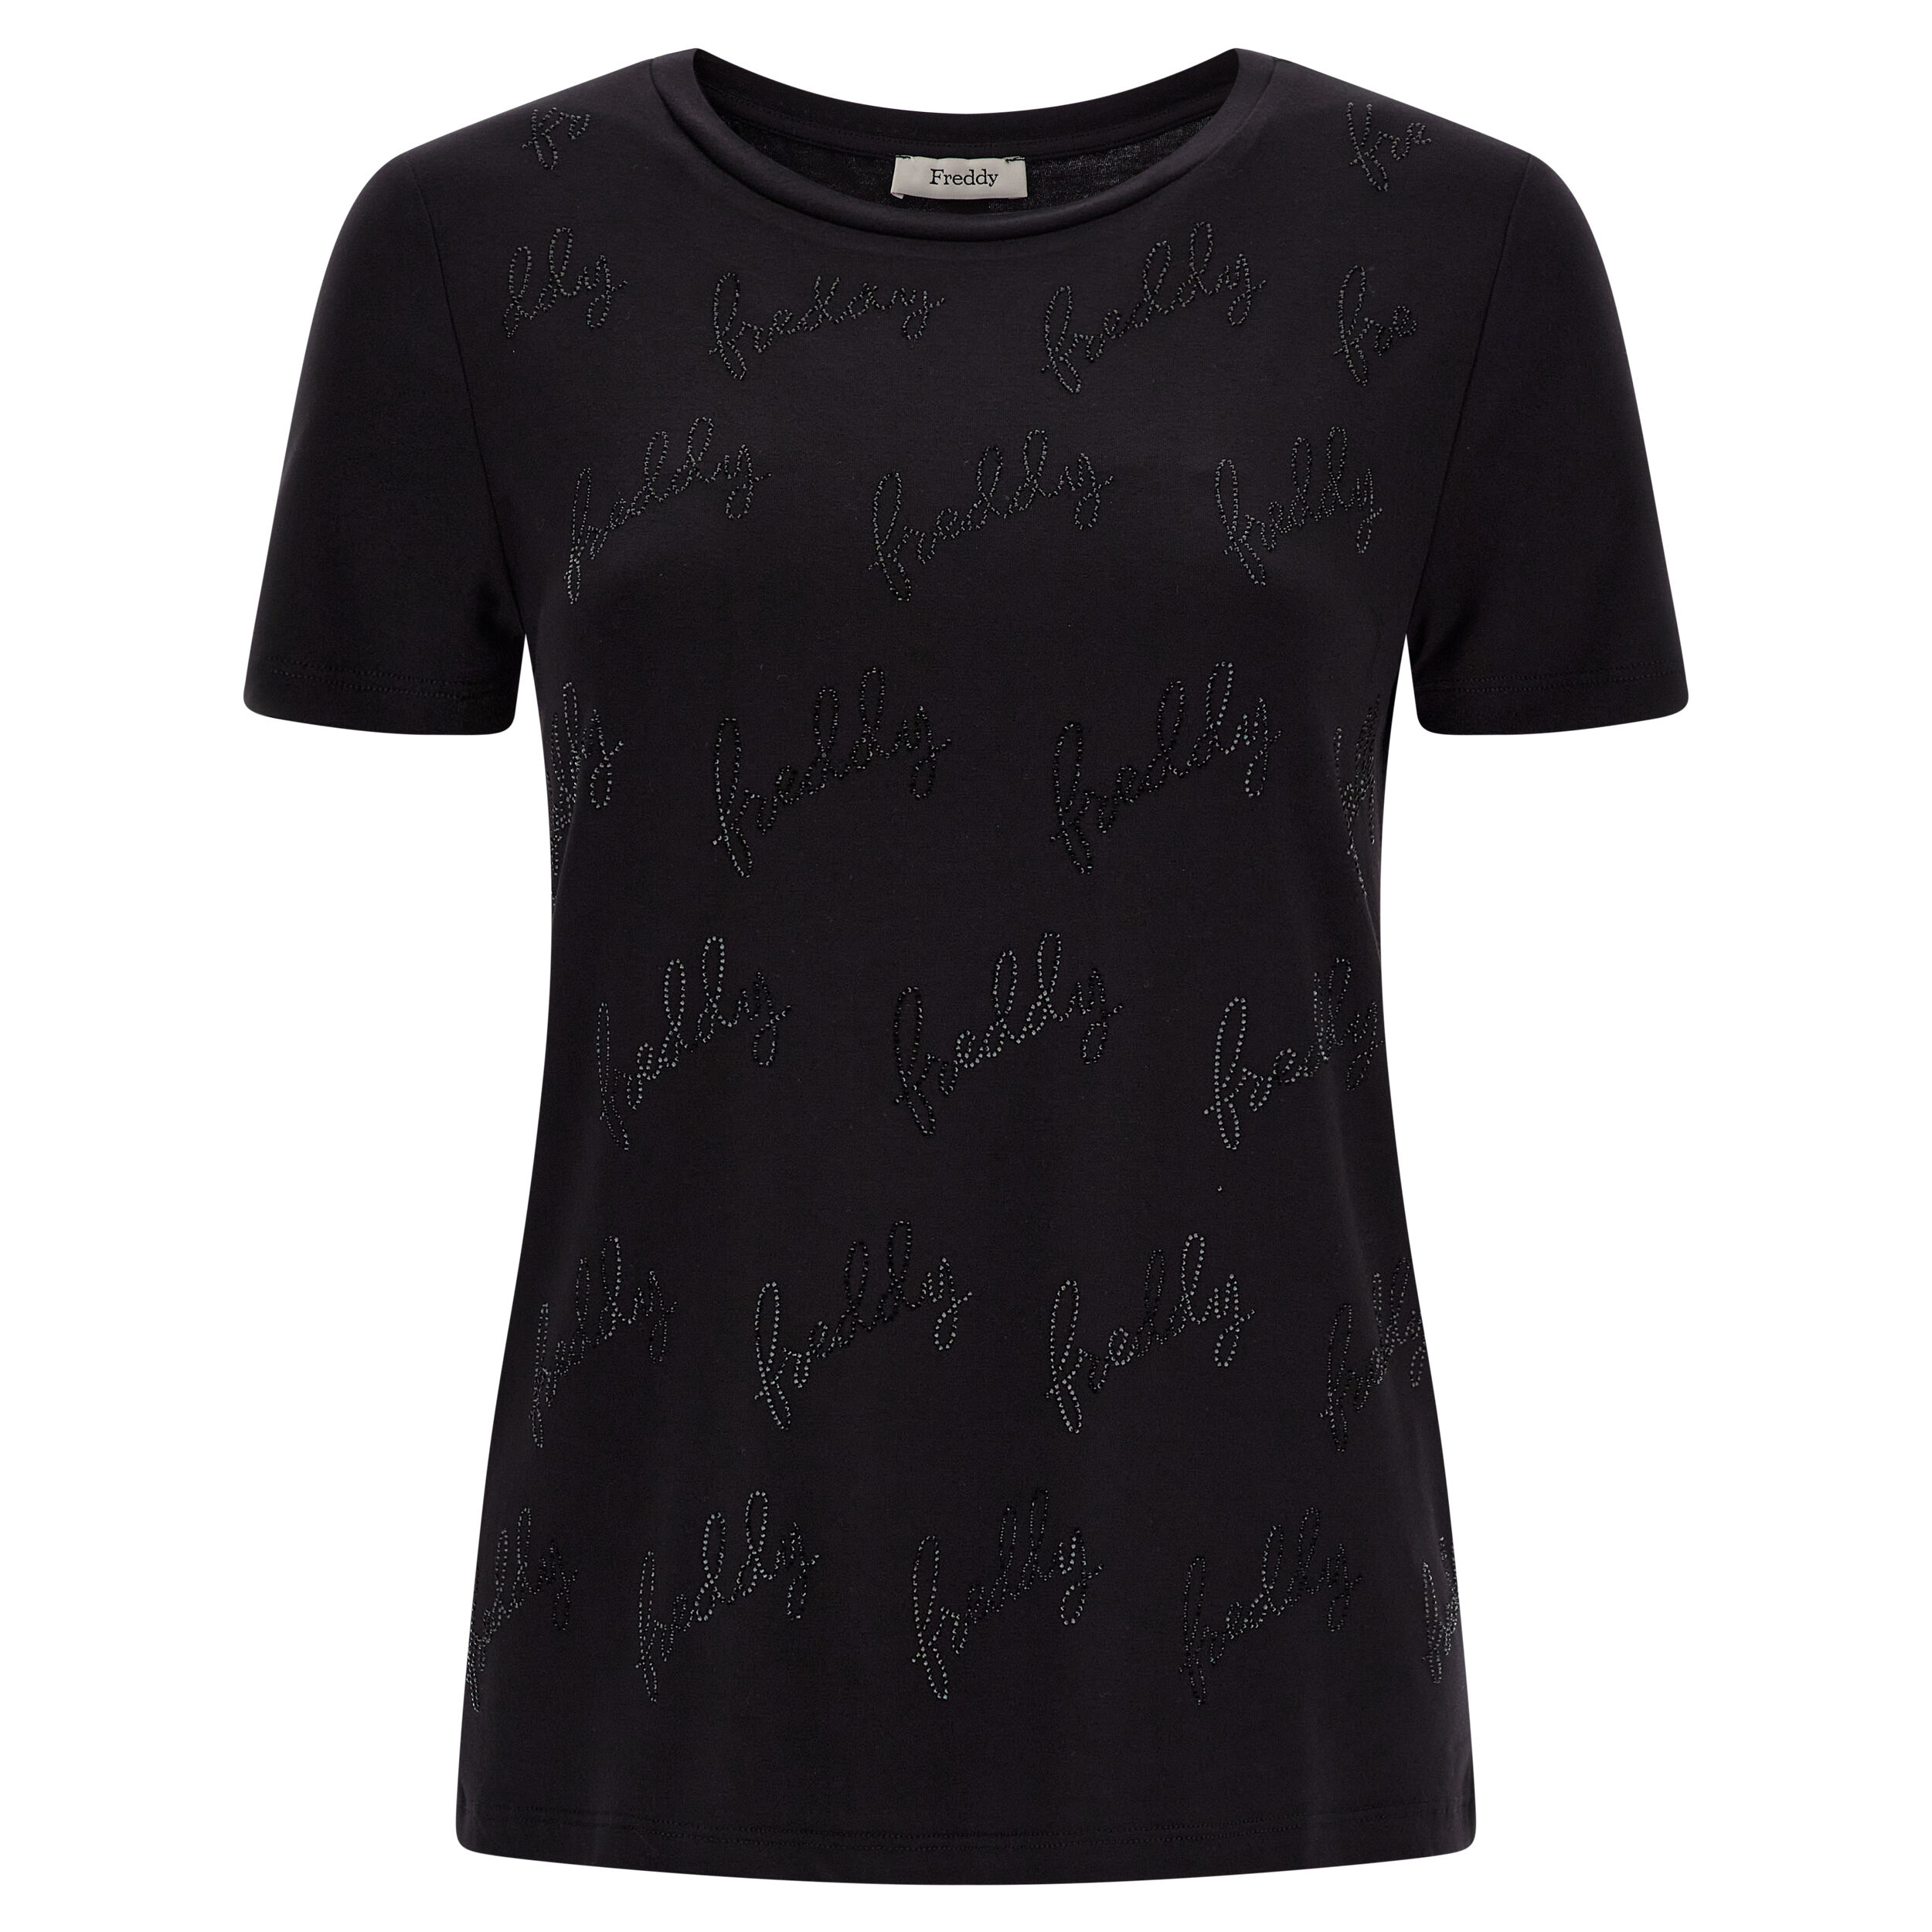 Freddy T-shirt con logo all-over in strass sul fronte Black- Gray Black Donna Large